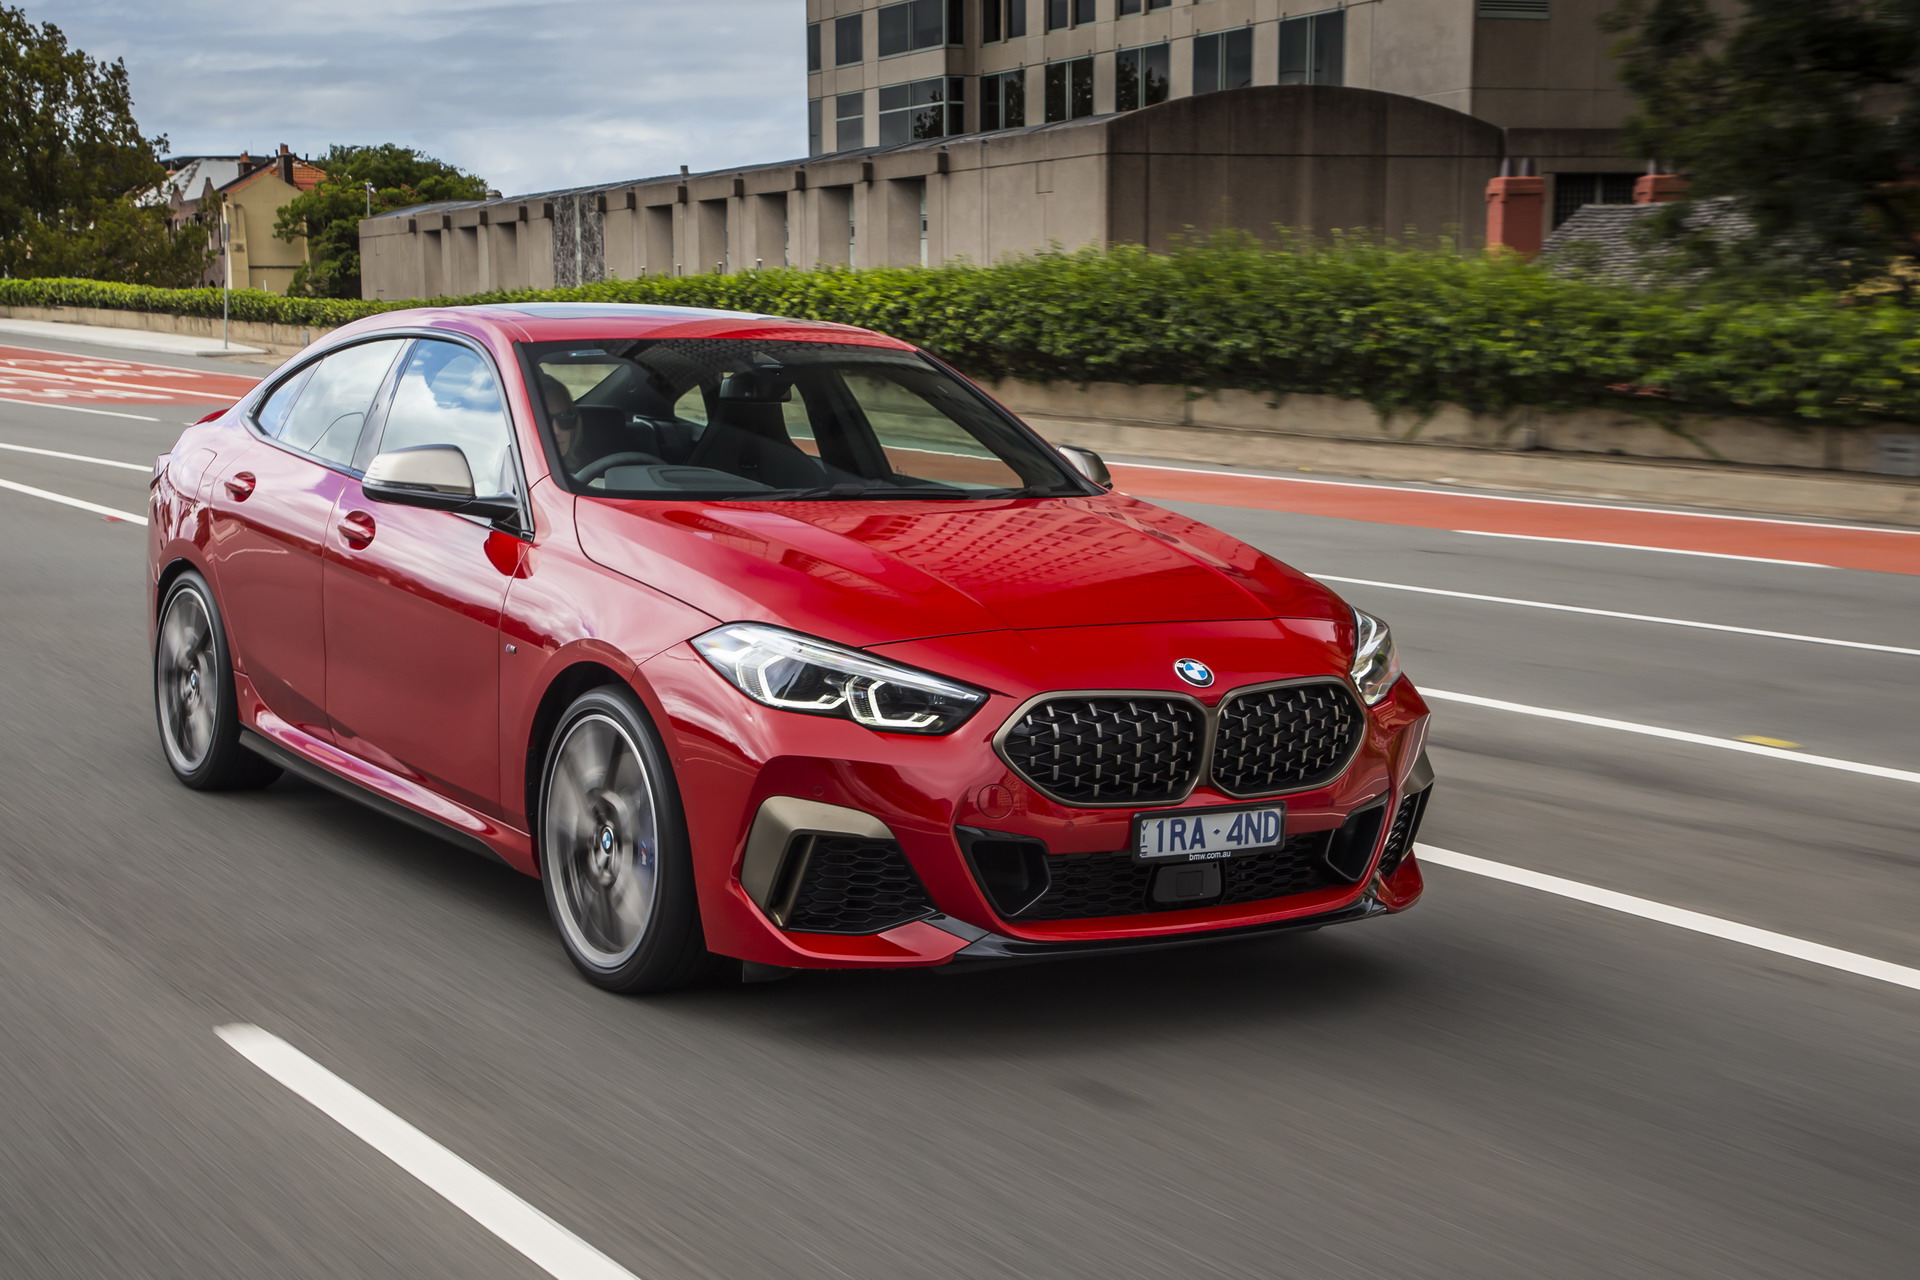 BMW M235i Gran Coupe in Melbourne Red, starting at AUD 69,990 in Australia